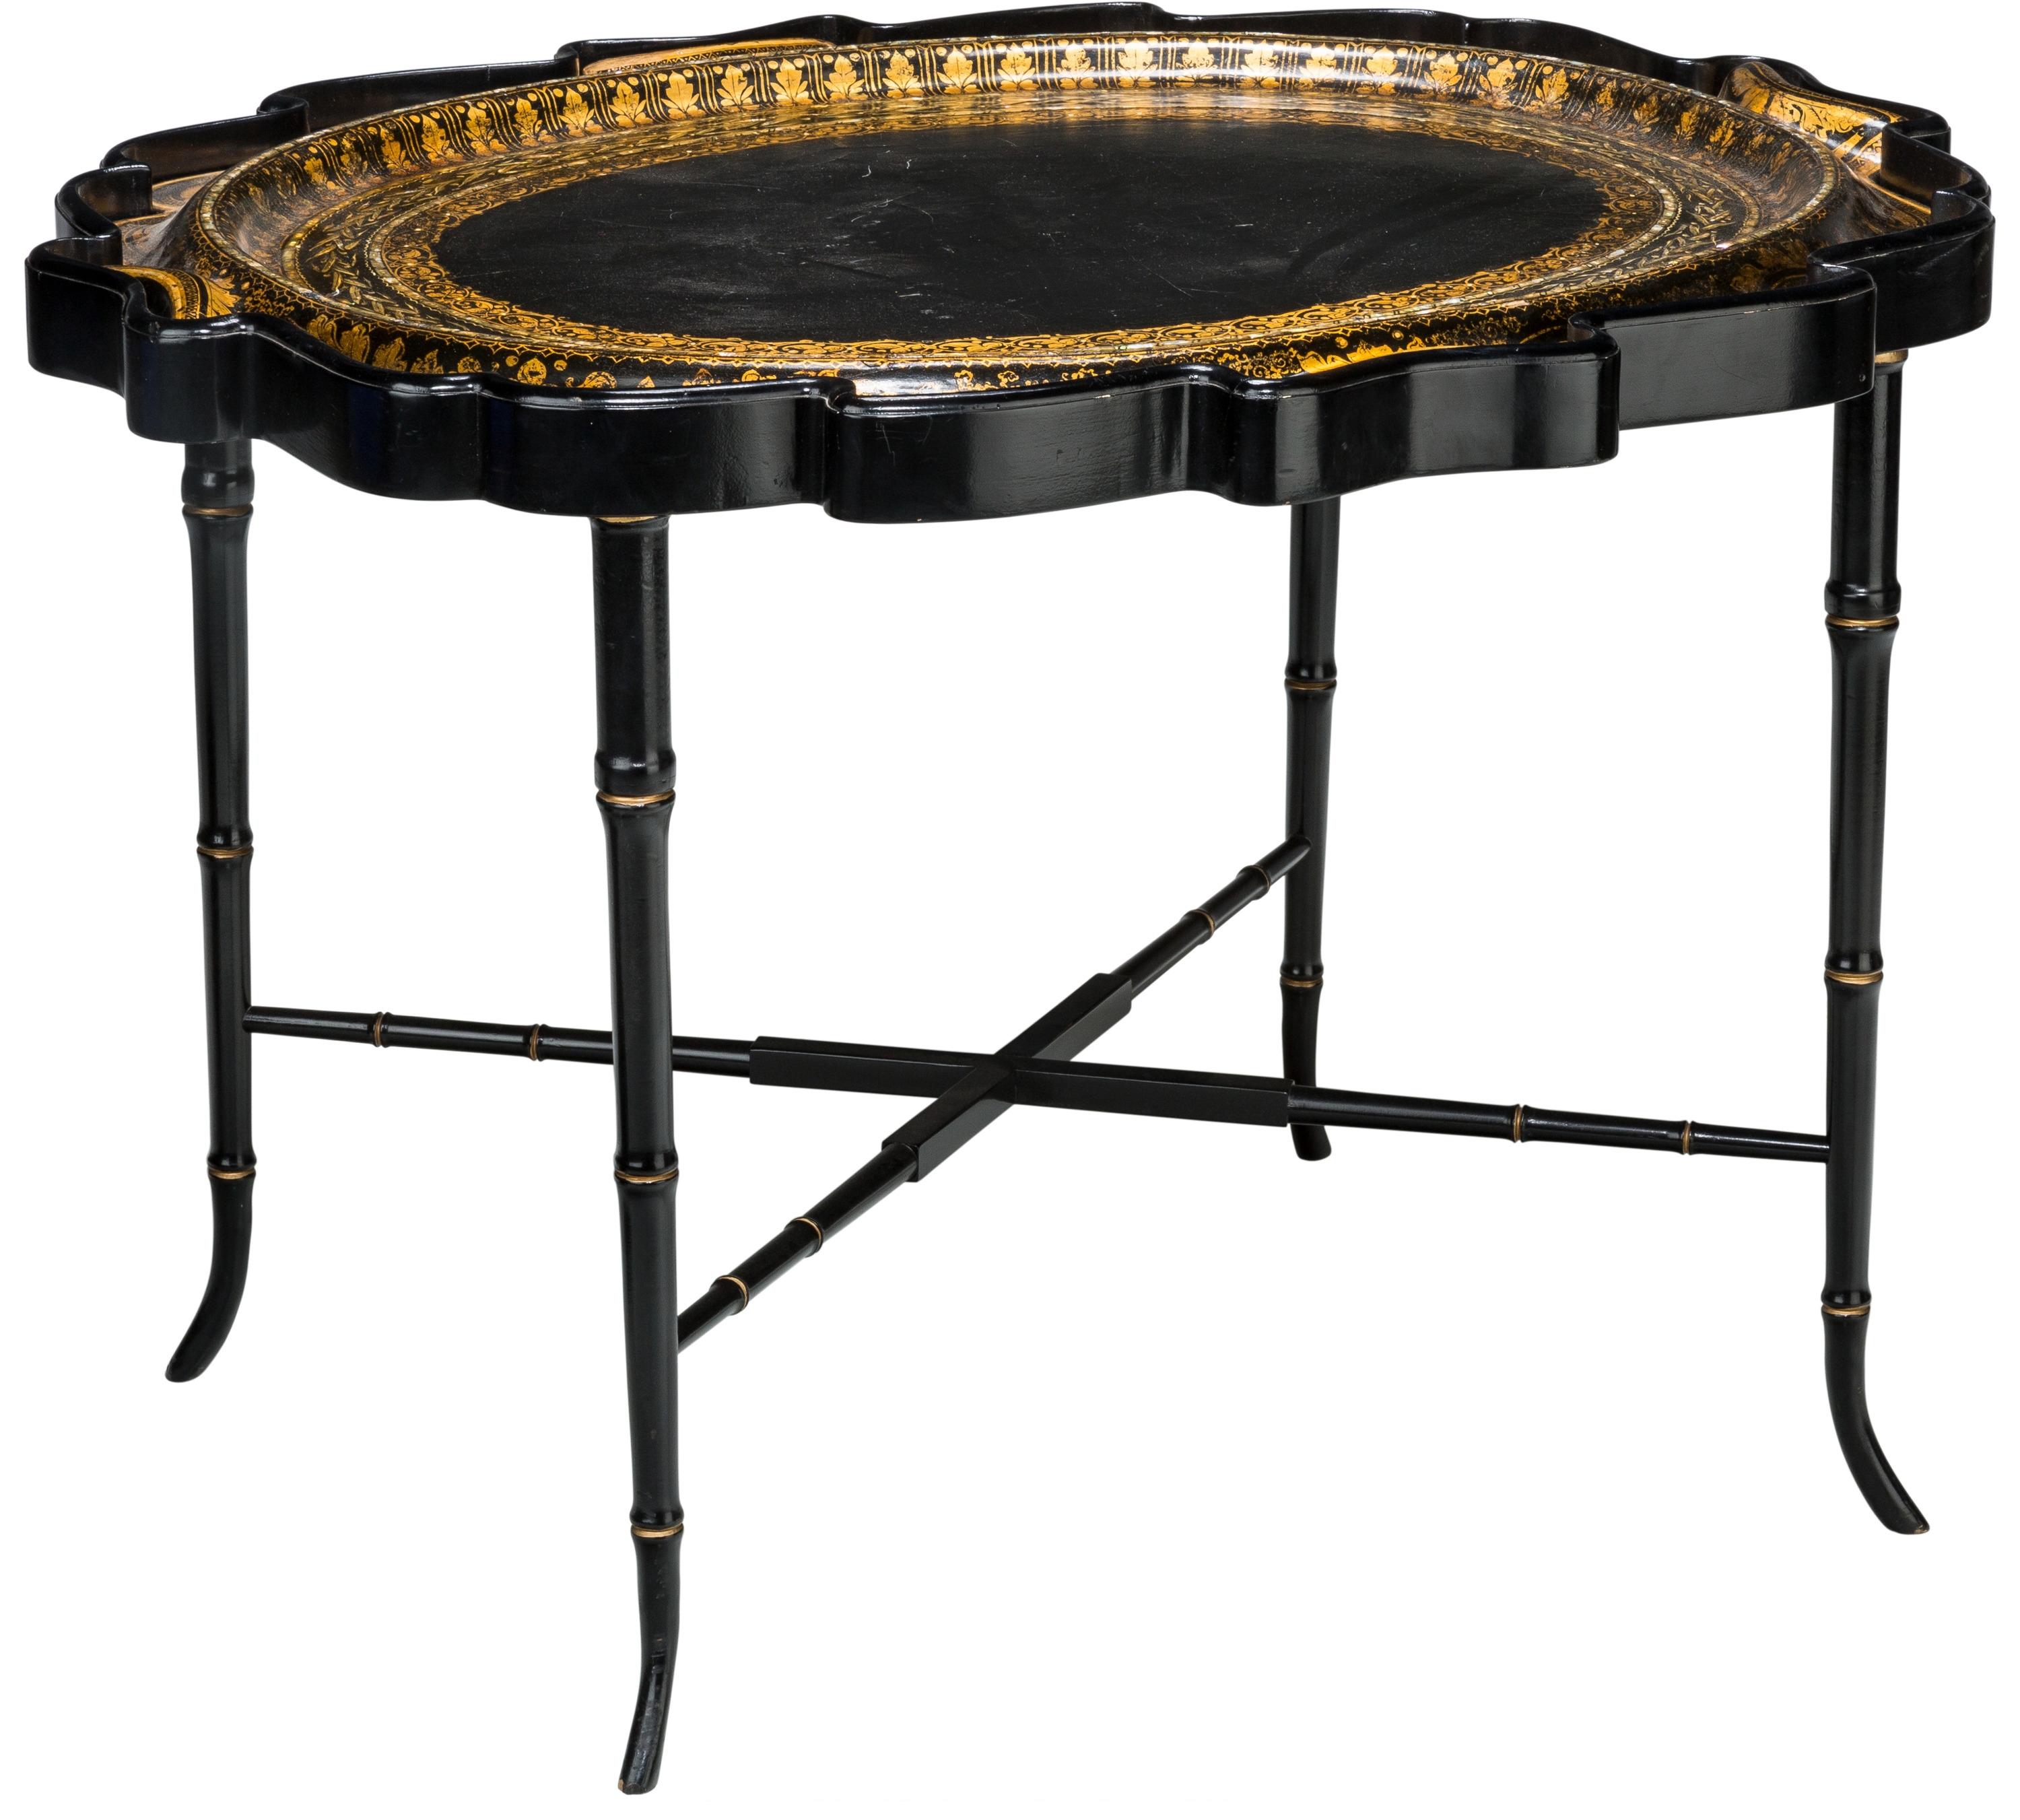 Mother-of-Pearl 19c English Partial Gilt Paper Mache Tray Table, 19c MOP Inlaid   For Sale